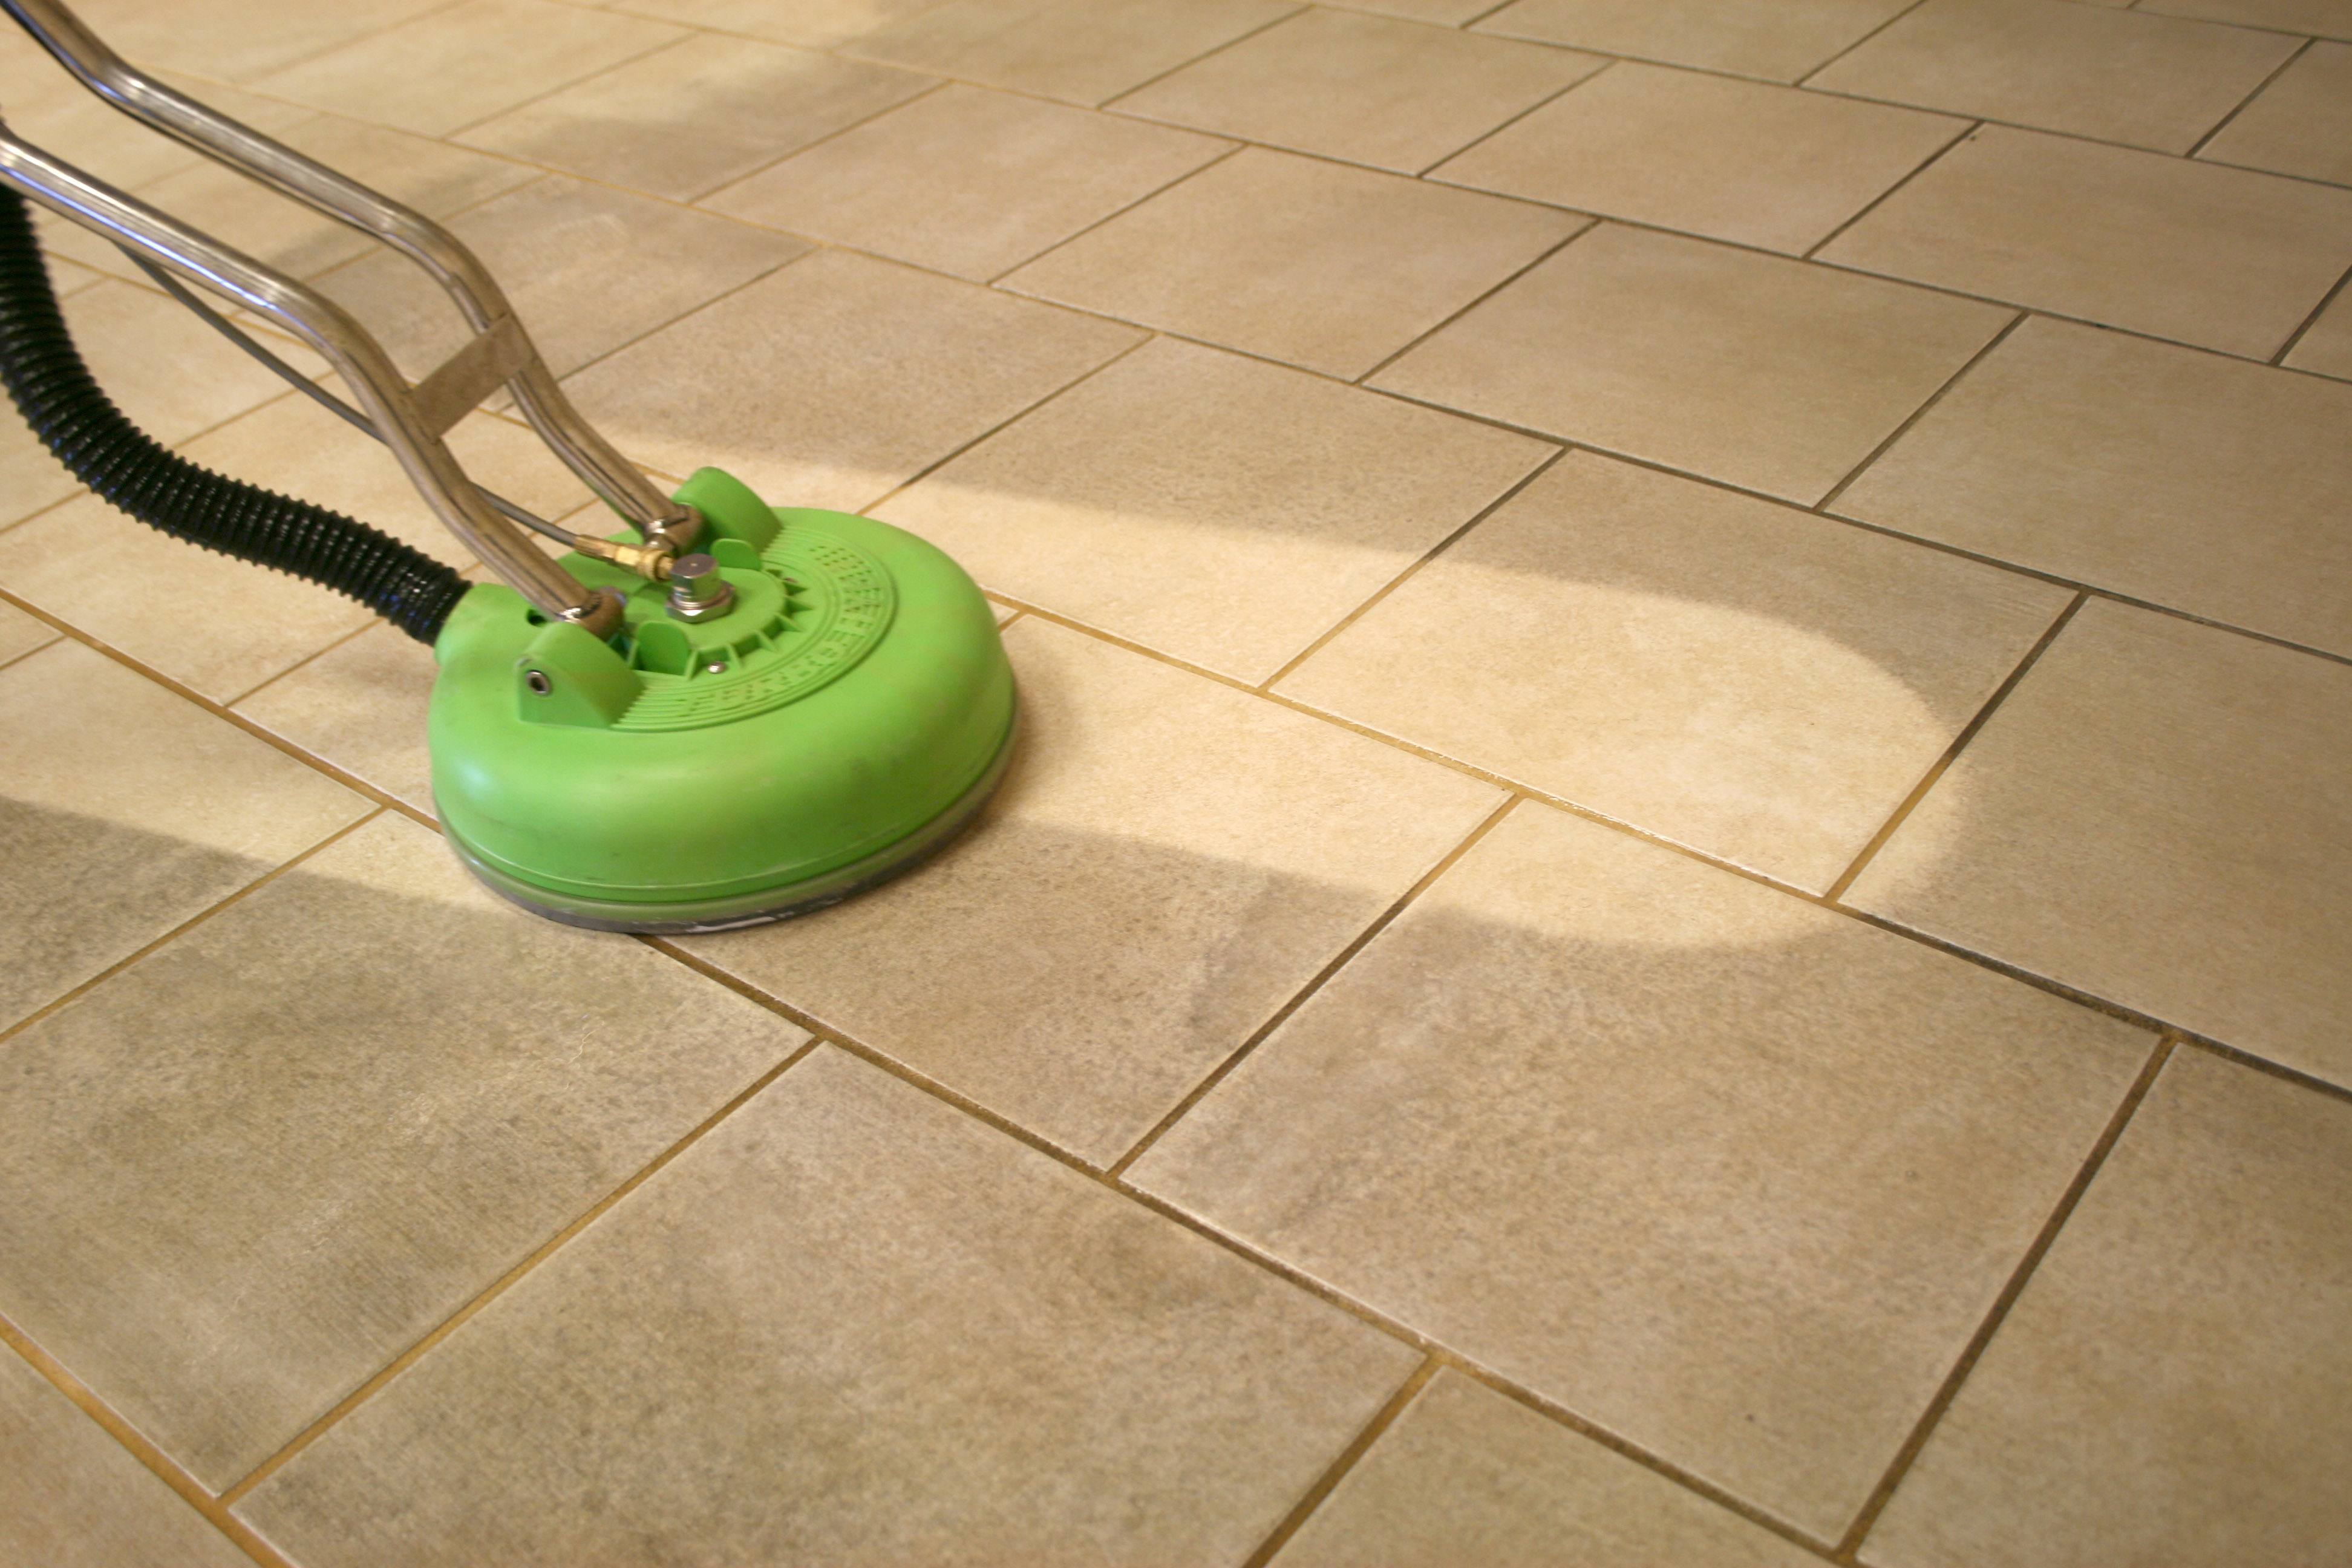 Tile-Grout-Cleaning-Steam-Green-Carpet-Cleaning